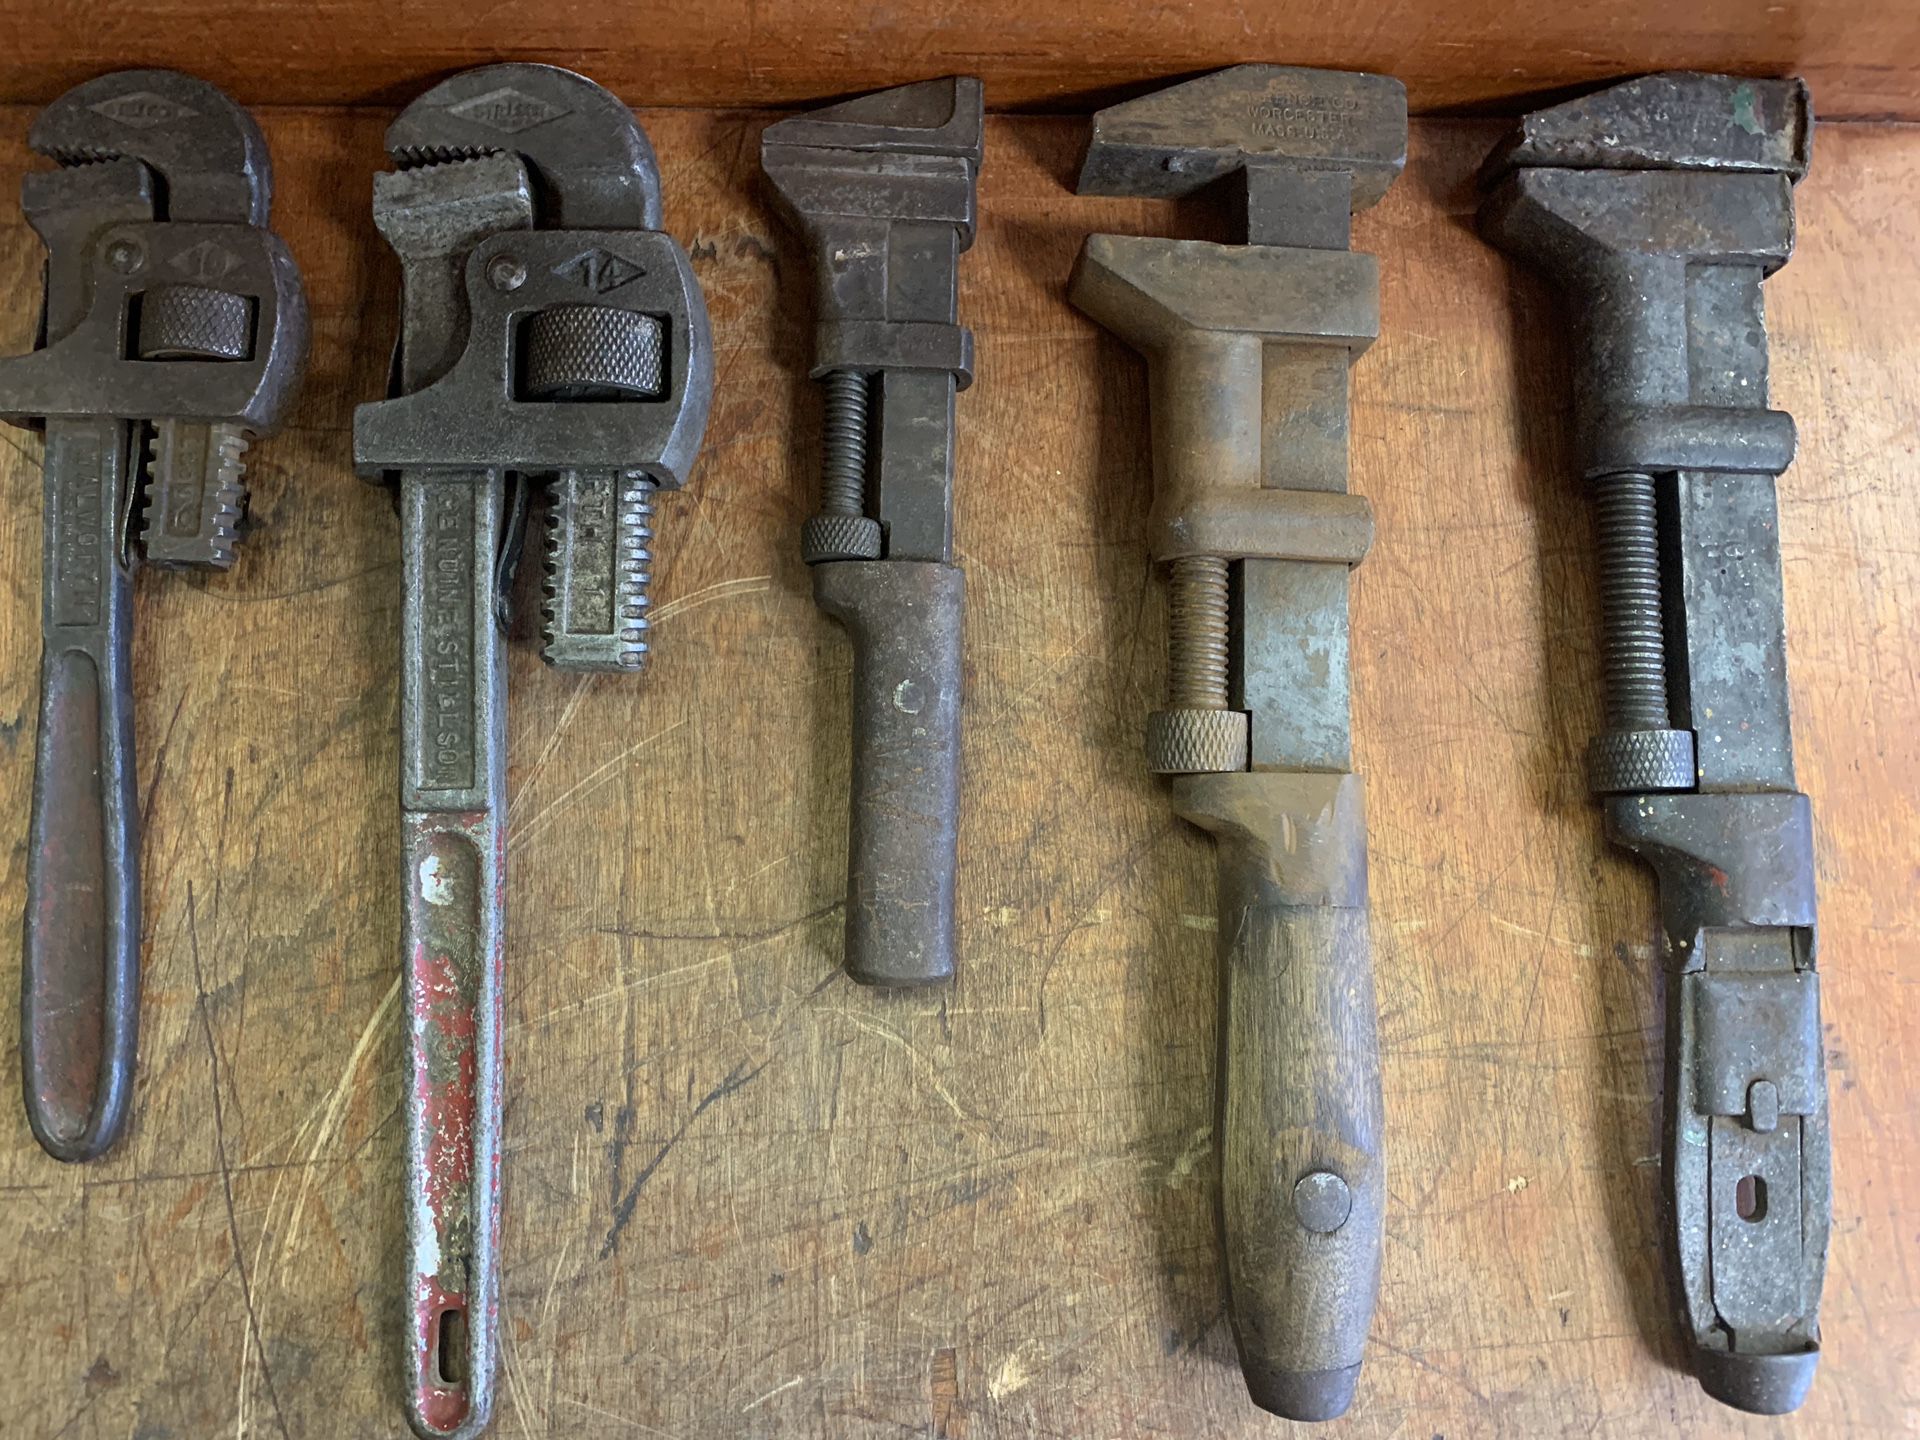 antique Coes monkey wrenches, vintage Billings railroad wrench